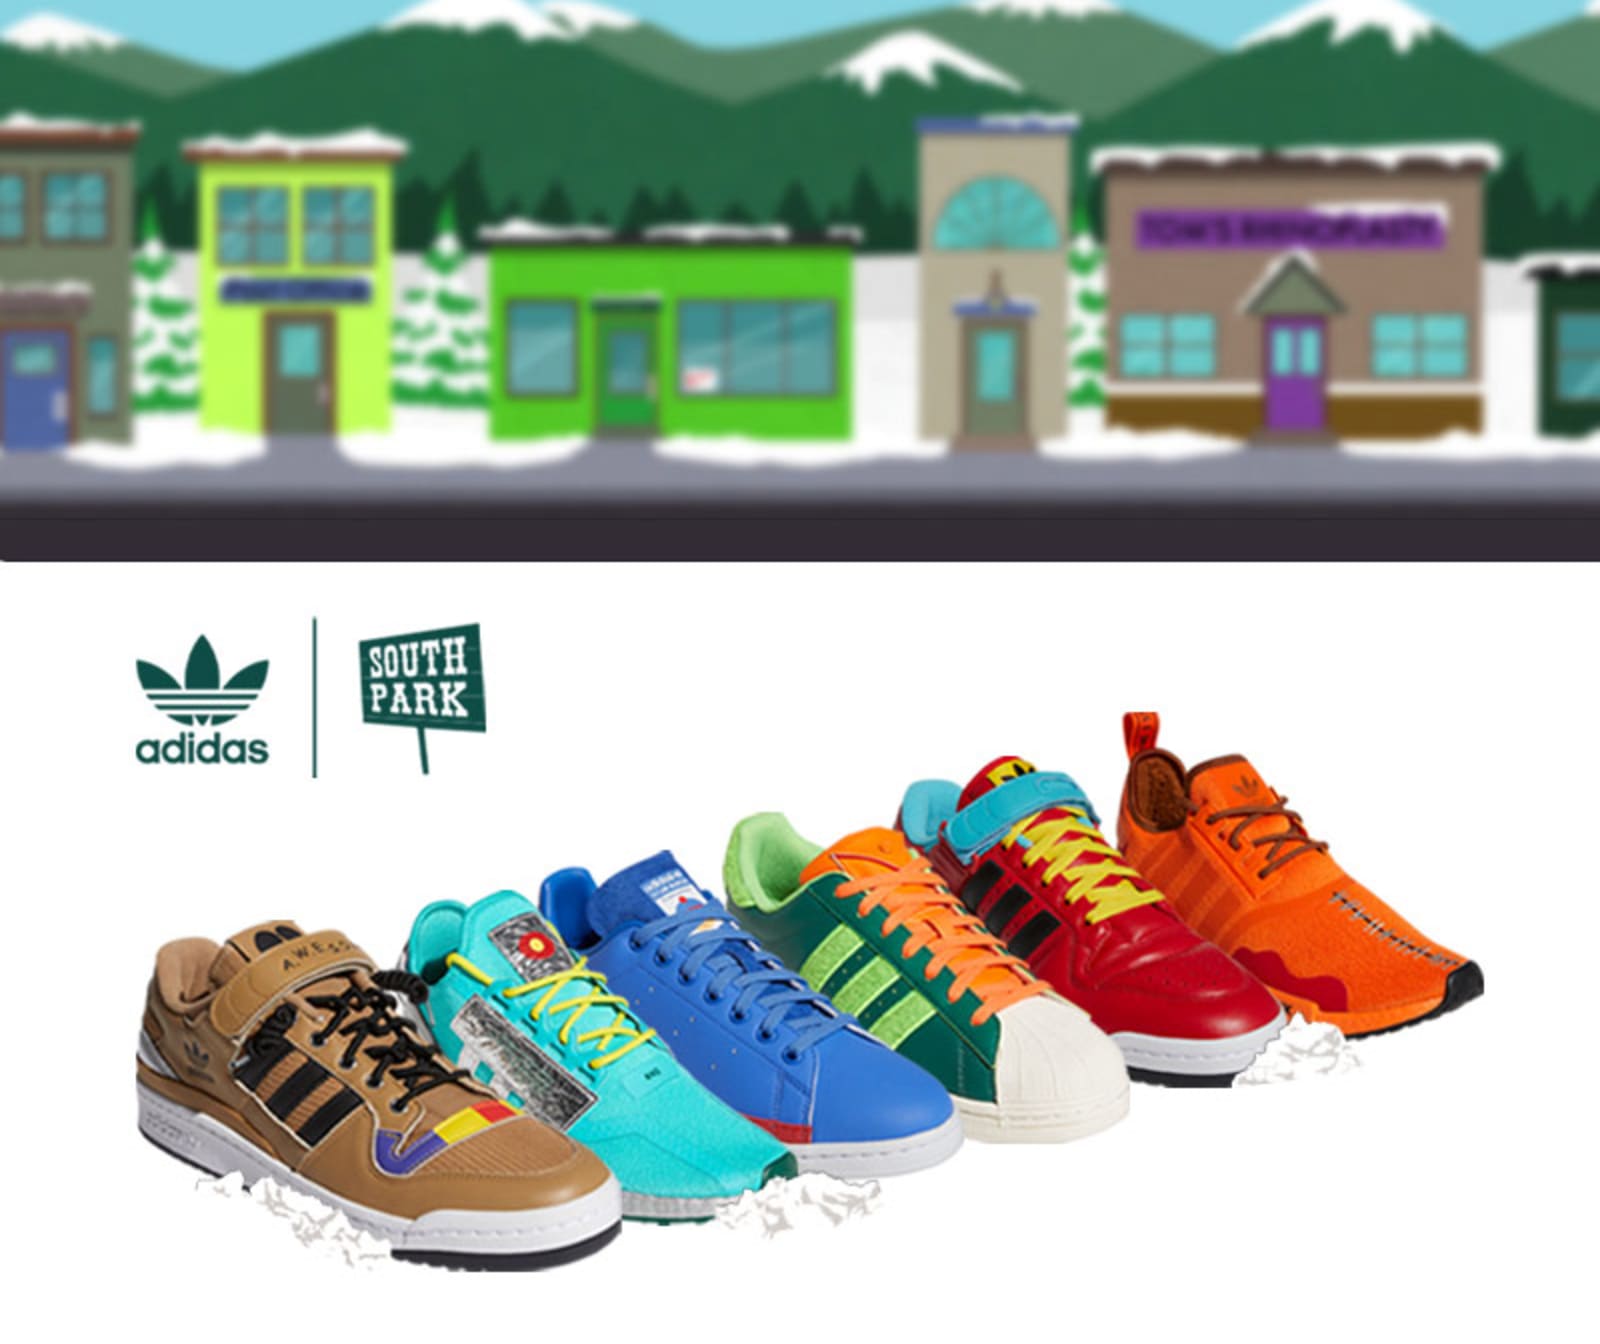 south-park-adidas-collection